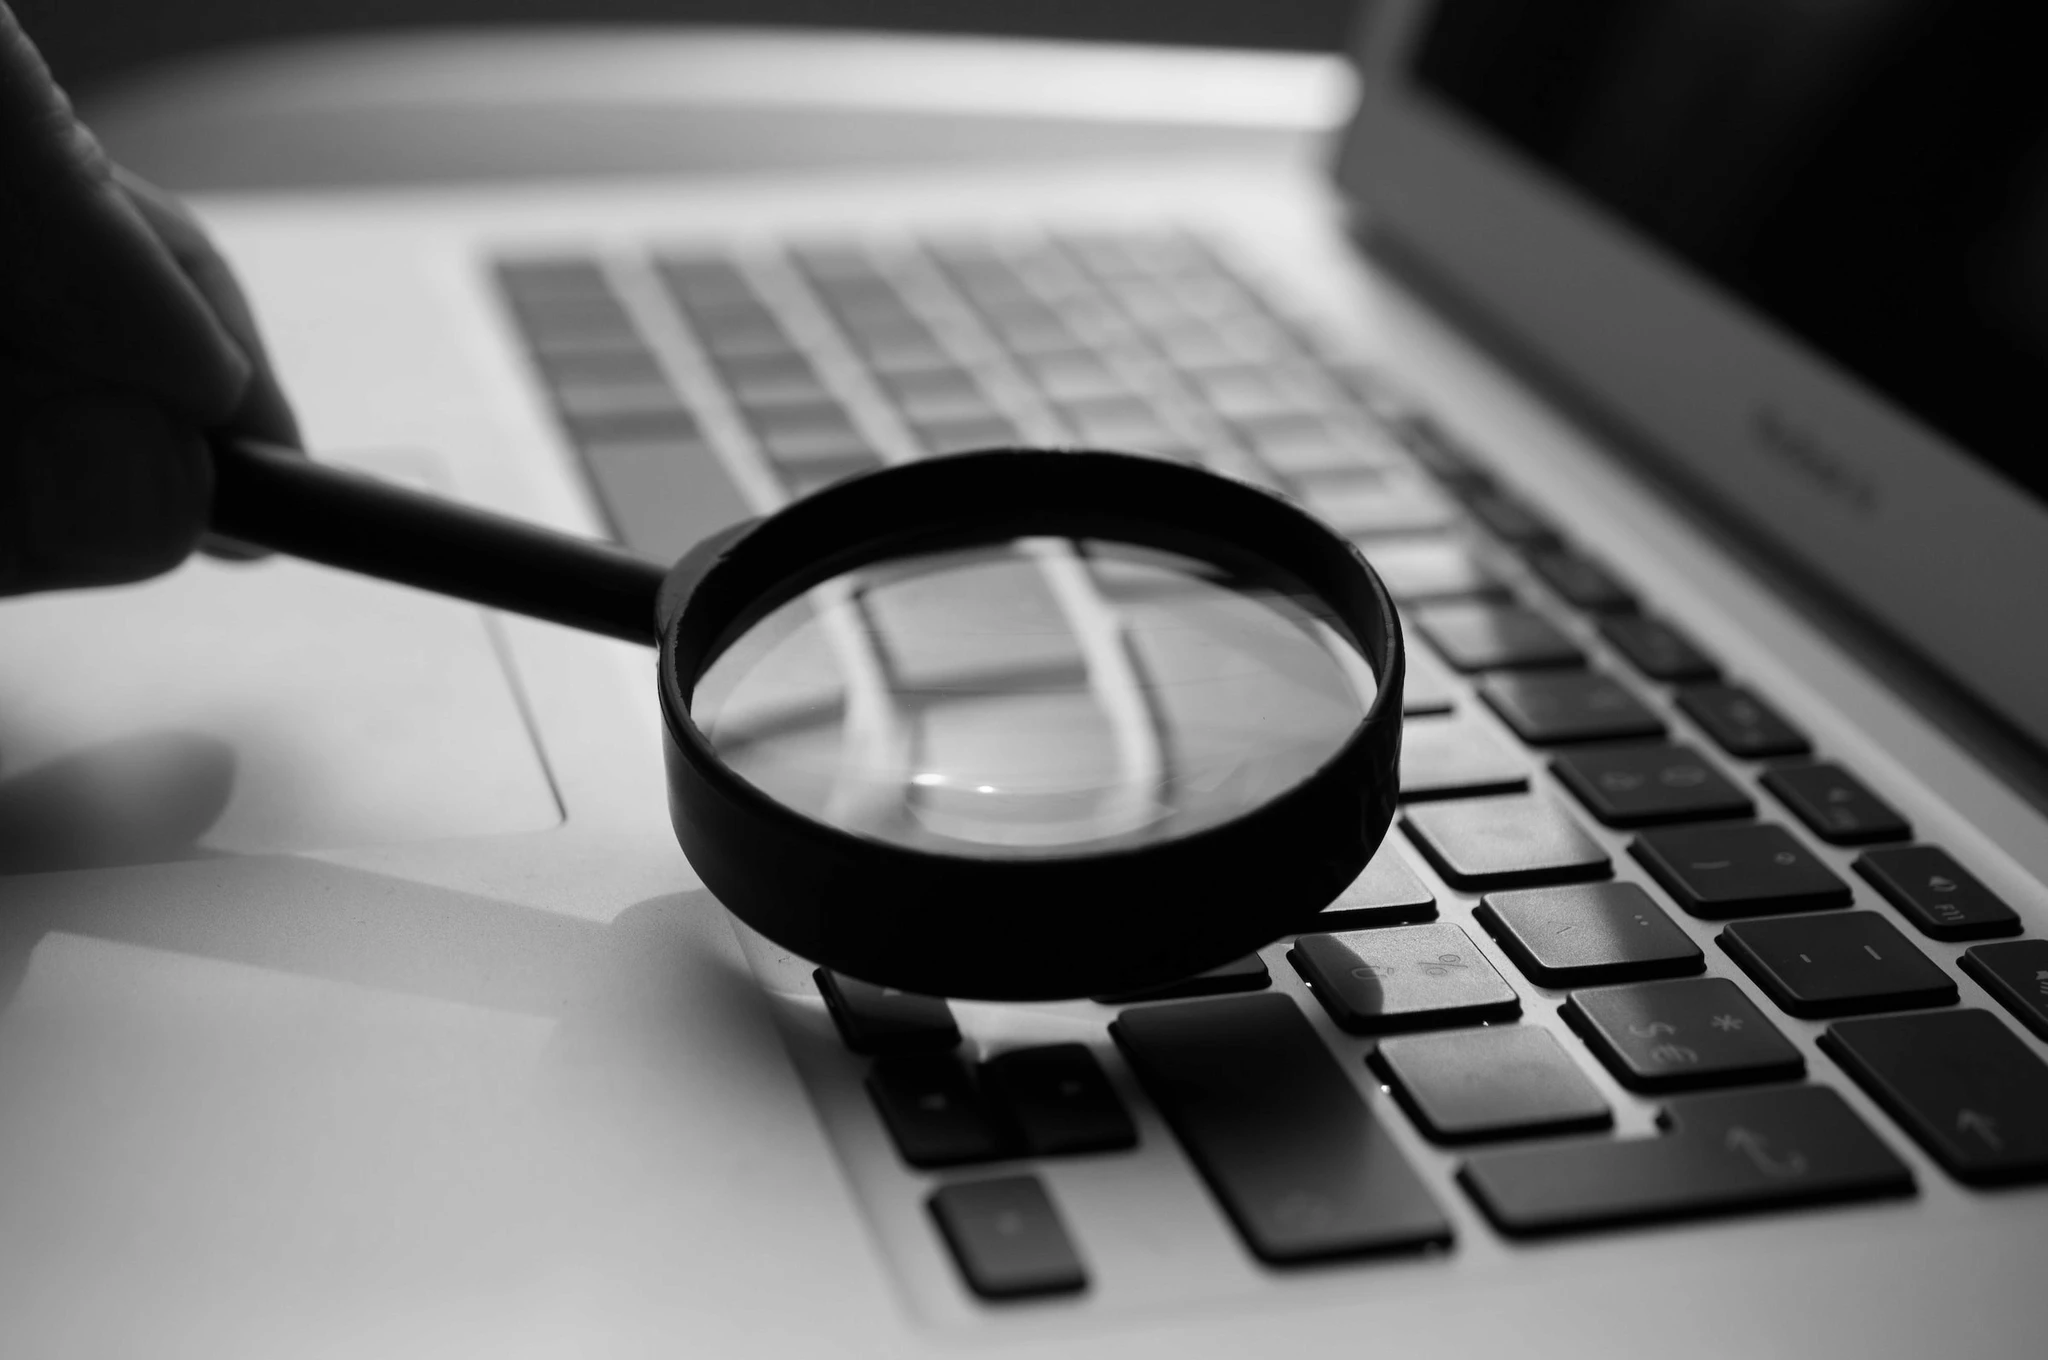 A black and white image depicting a hand holding a magnifying glass over a laptop keyboard, suggesting scrutiny, investigation, or detailed examination. The magnifying glass is focused on the keyboard, blurring the surrounding area and drawing attention to the keys beneath it. The laptop brand is partially visible, indicating a modern and possibly professional context.